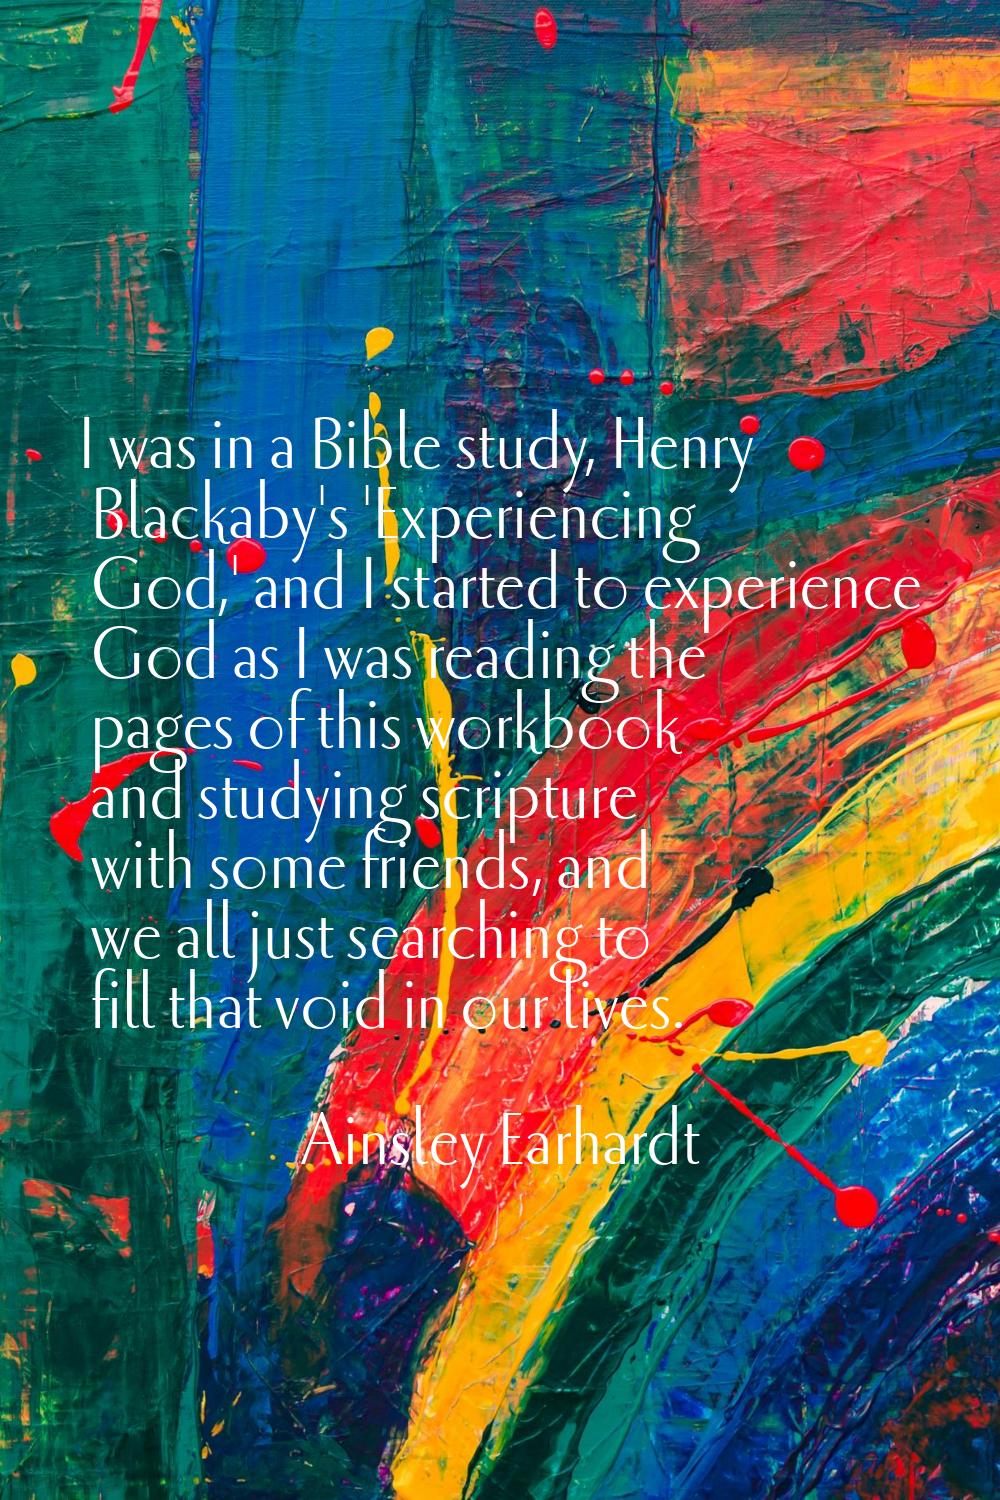 I was in a Bible study, Henry Blackaby's 'Experiencing God,' and I started to experience God as I w